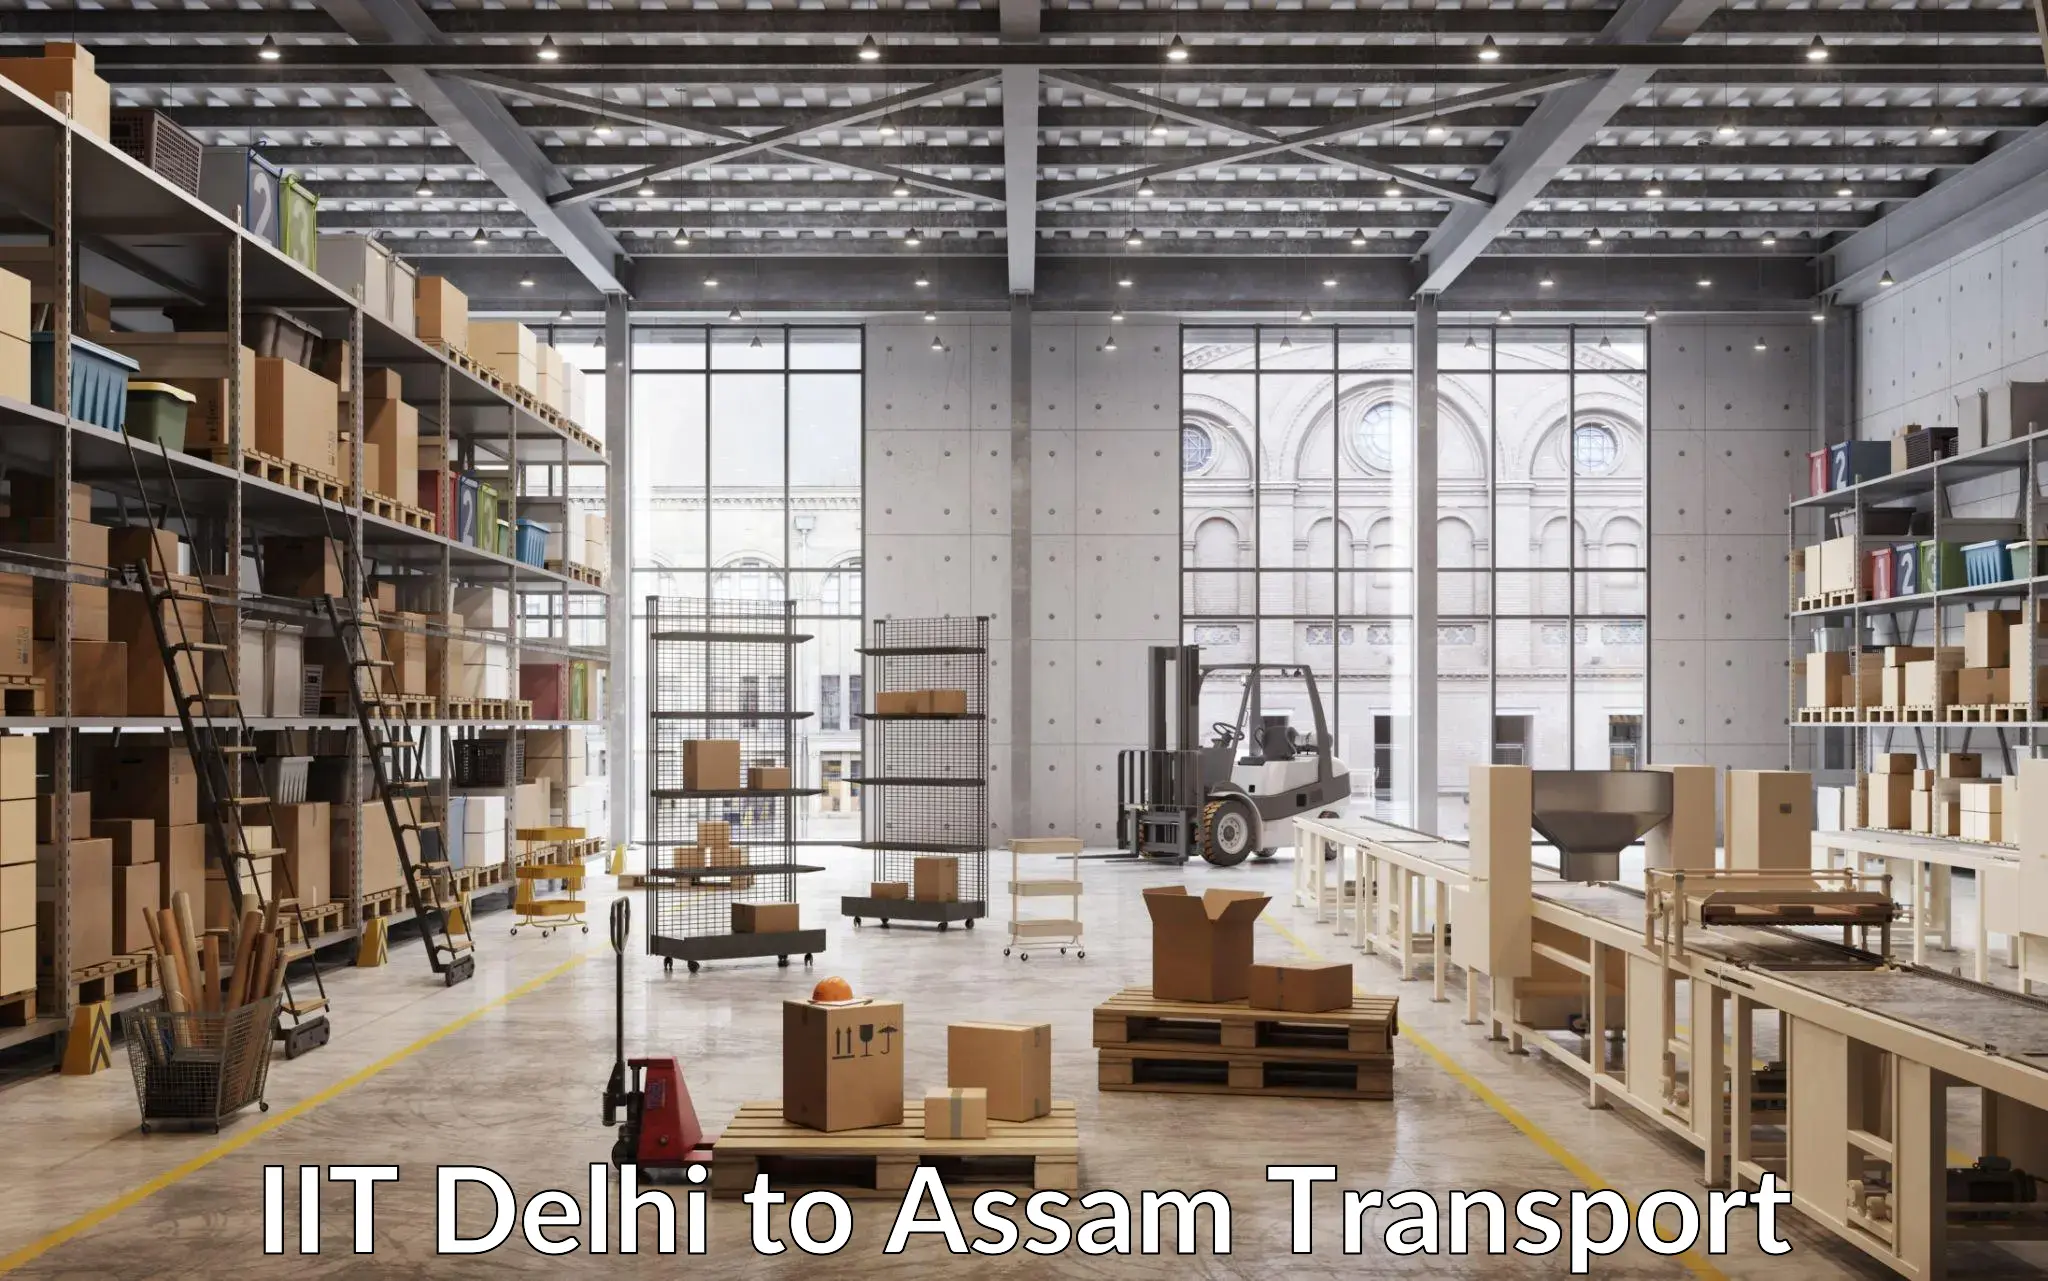 Air freight transport services in IIT Delhi to Assam